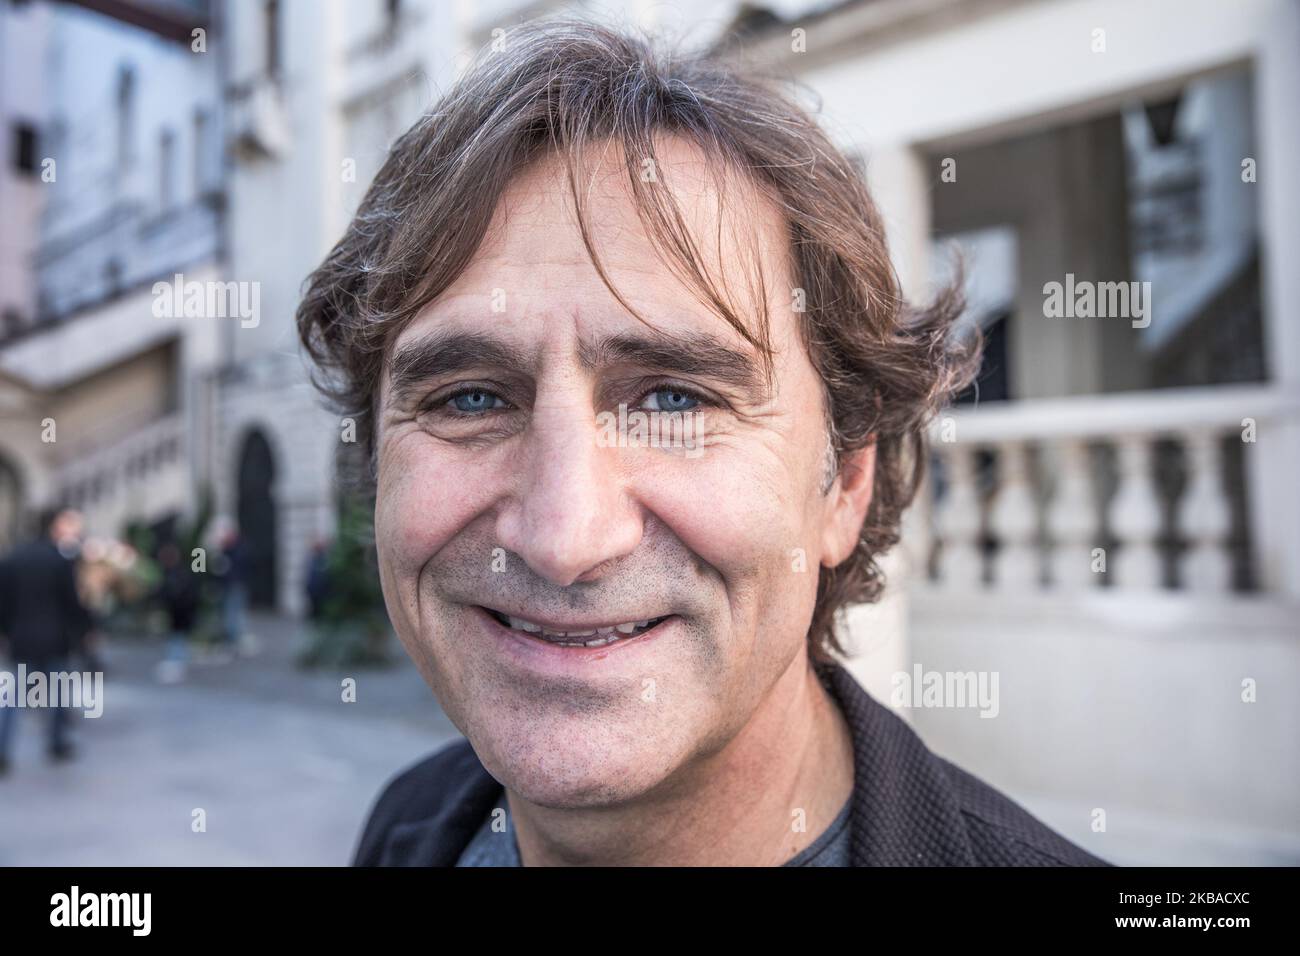 Alex Zanardi participates in the Paralympic Culture Festival organized by the Italian Paralympic Committee to spread the knowledge of the world of disability and sport, in Padova, Italy, on November 7, 2019. (Photo by Mauro Ujetto/NurPhoto) Stock Photo